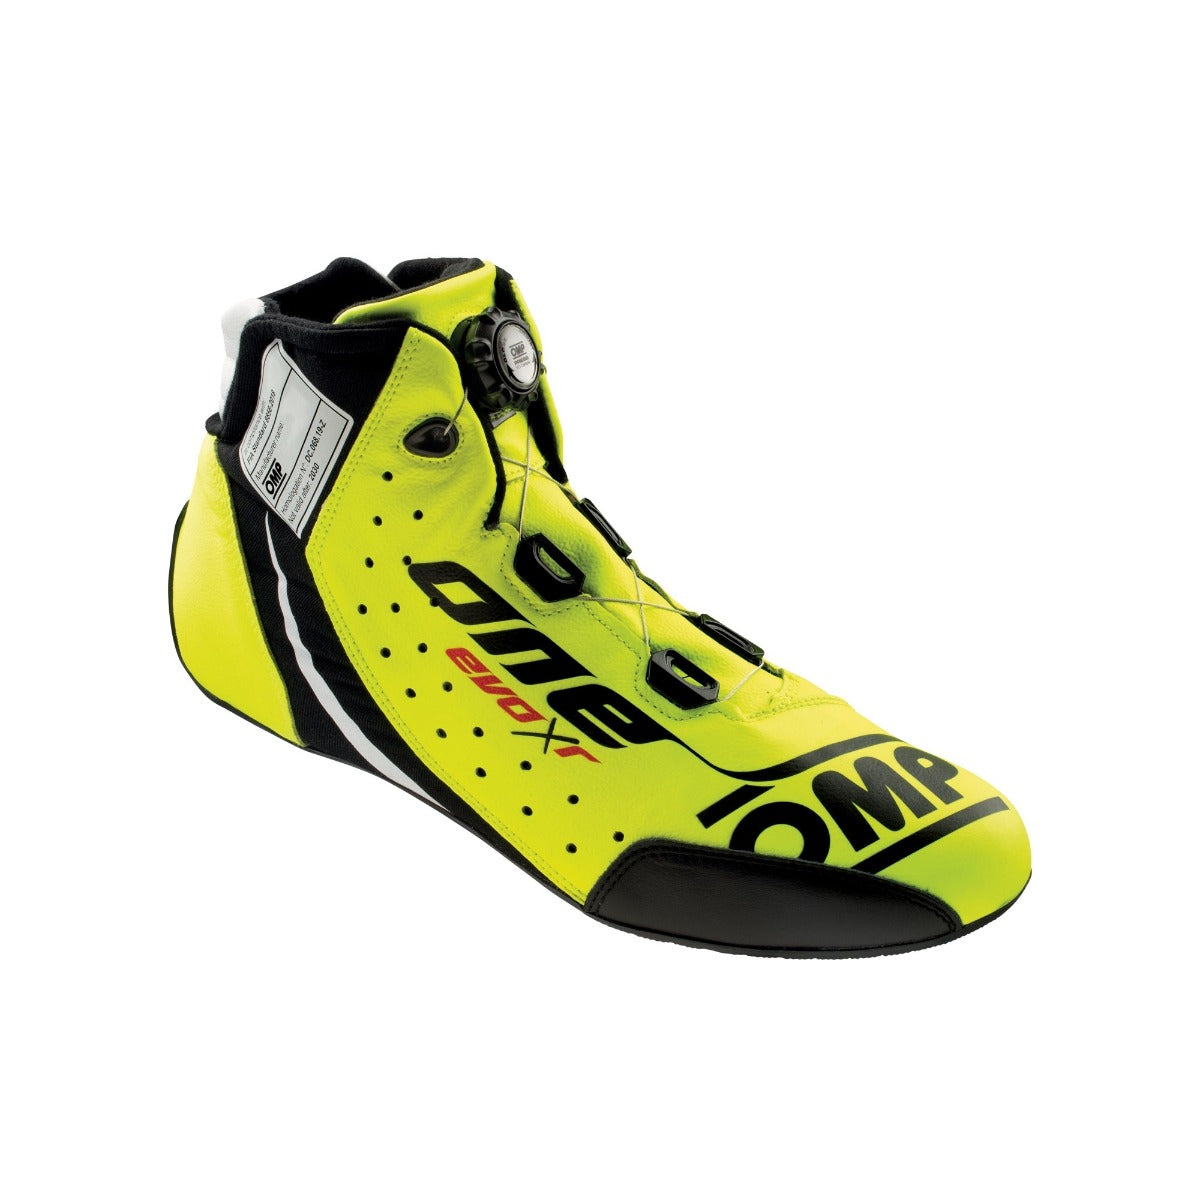 OMP One Evo X R Nomex Race Shoe in neon yellow